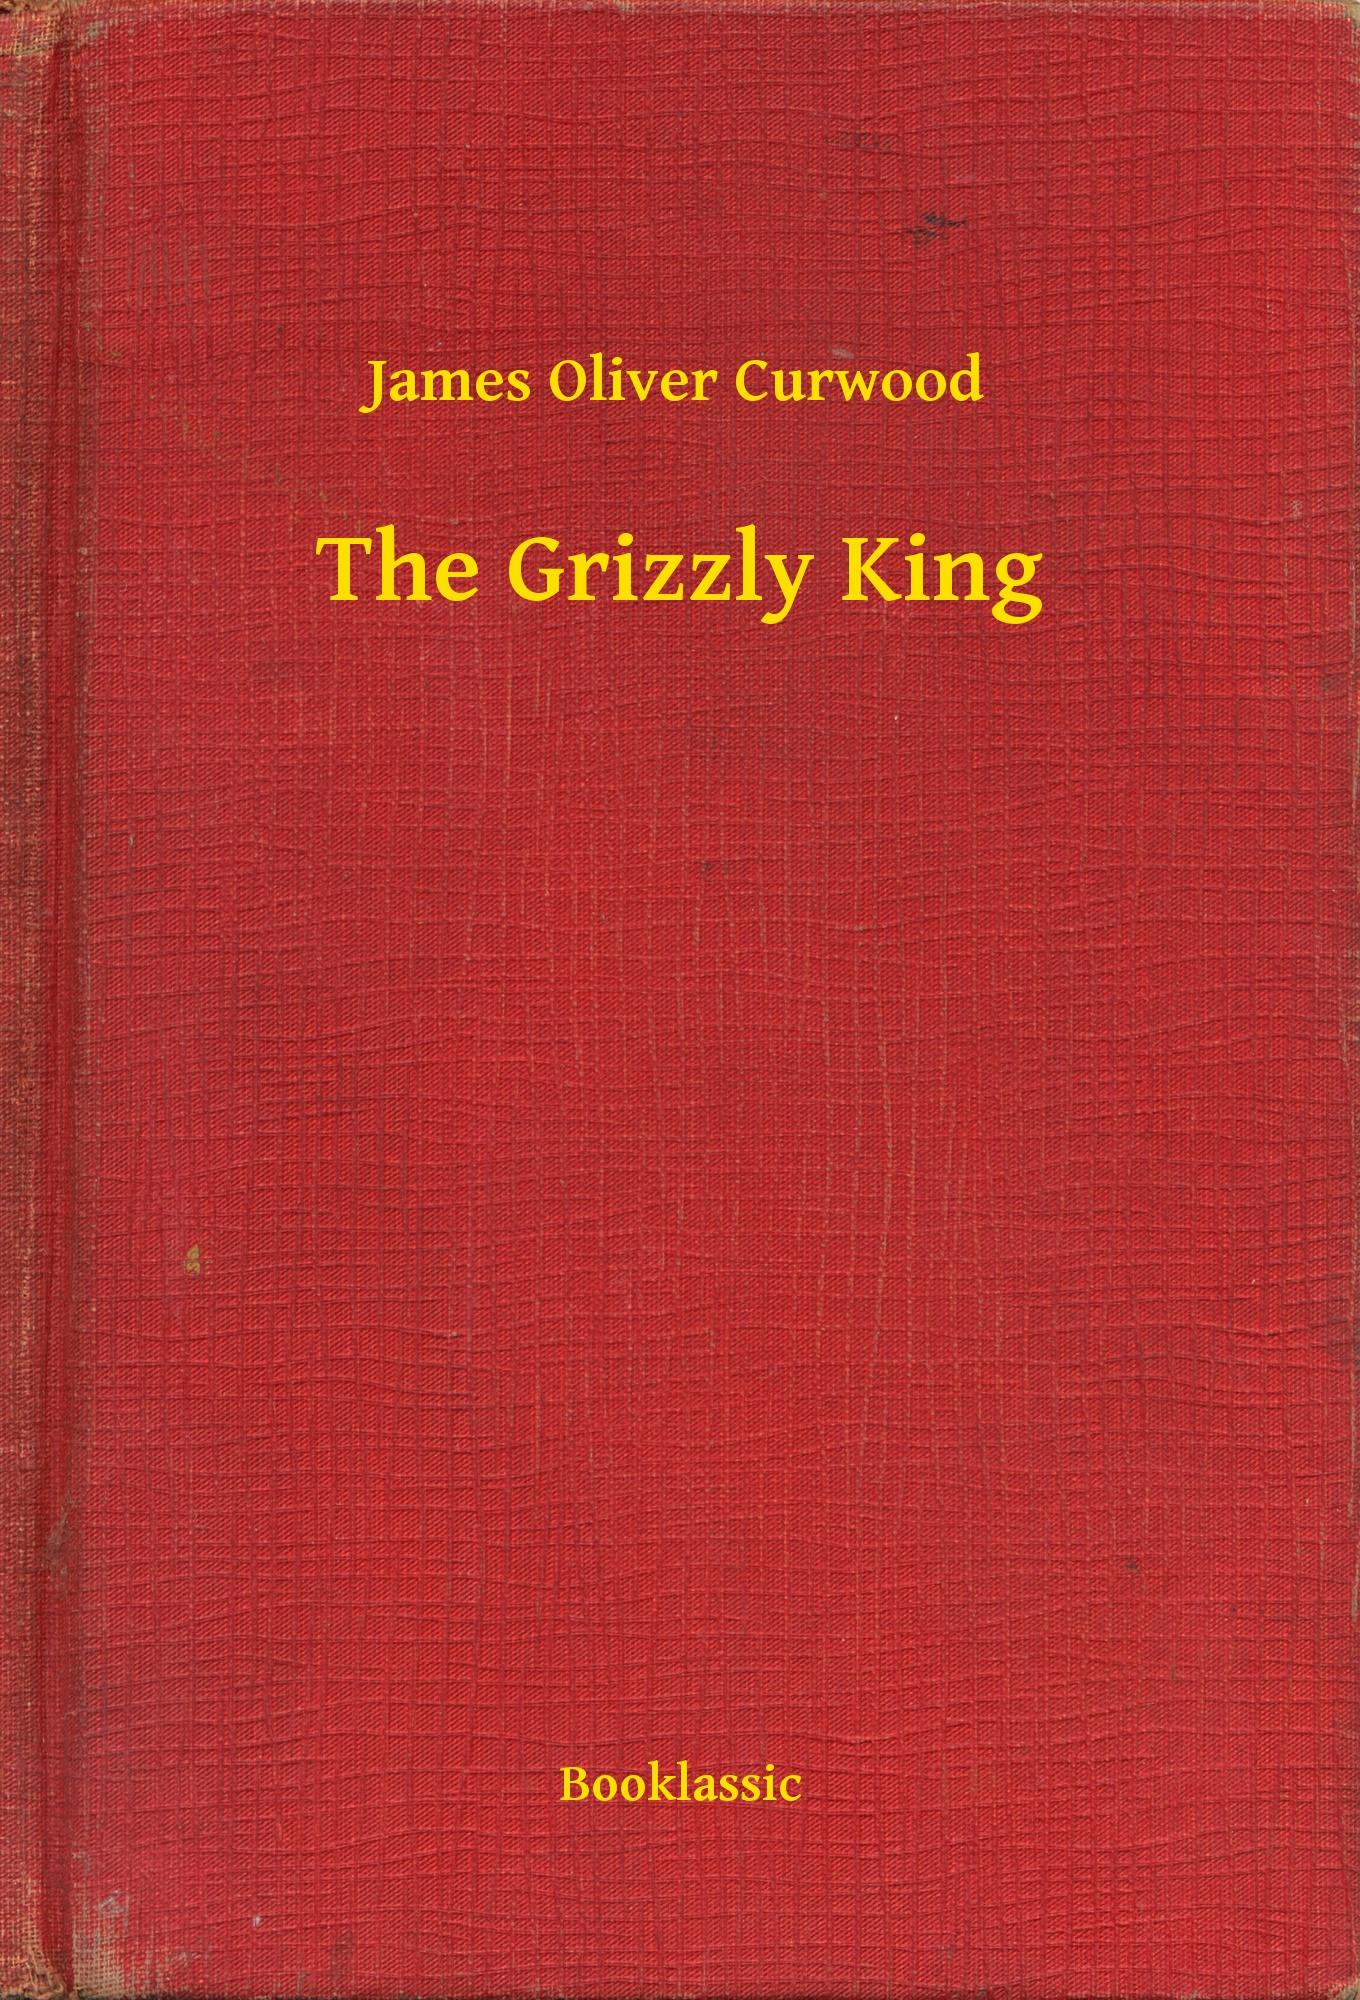 The Grizzly King - James Oliver Curwood